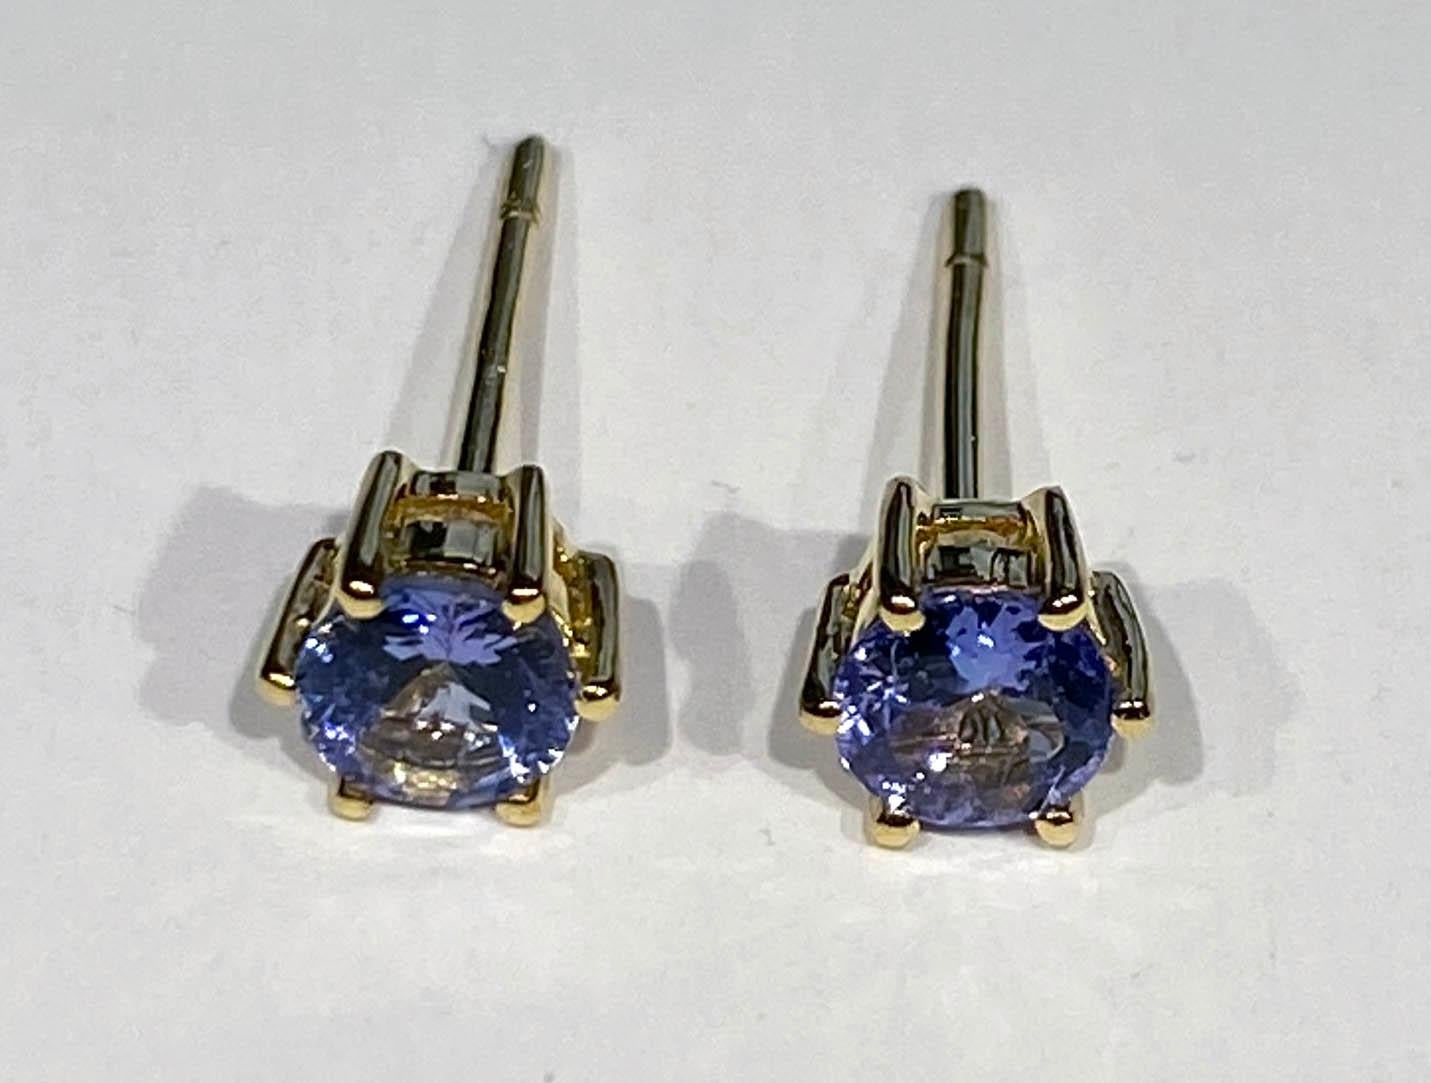 Tanzanite Stud Earrings set in 14kt Yellow Gold For Sale 5